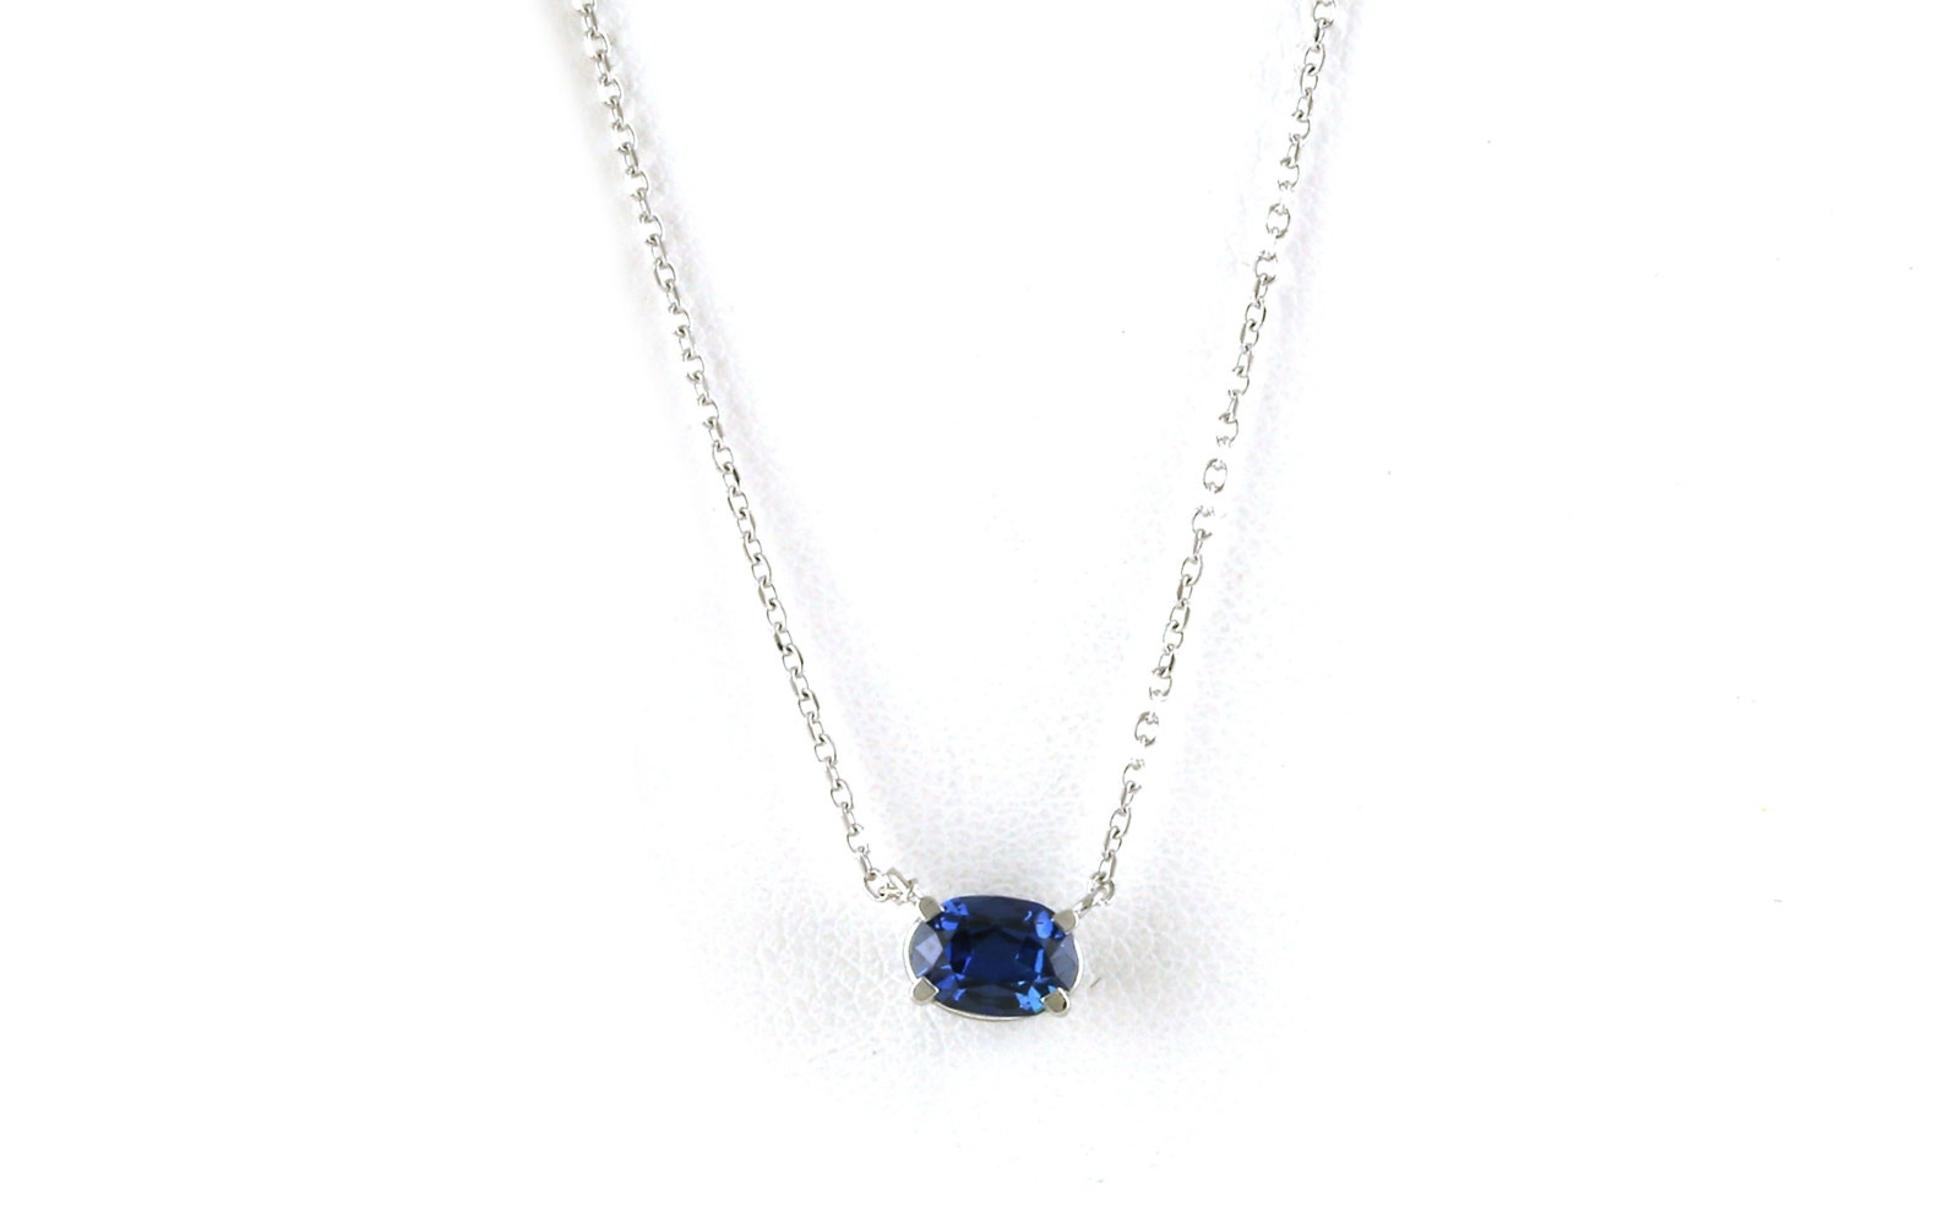 Landscape-set Oval Montana Yogo Sapphire Necklace in White Gold (0.70ct)